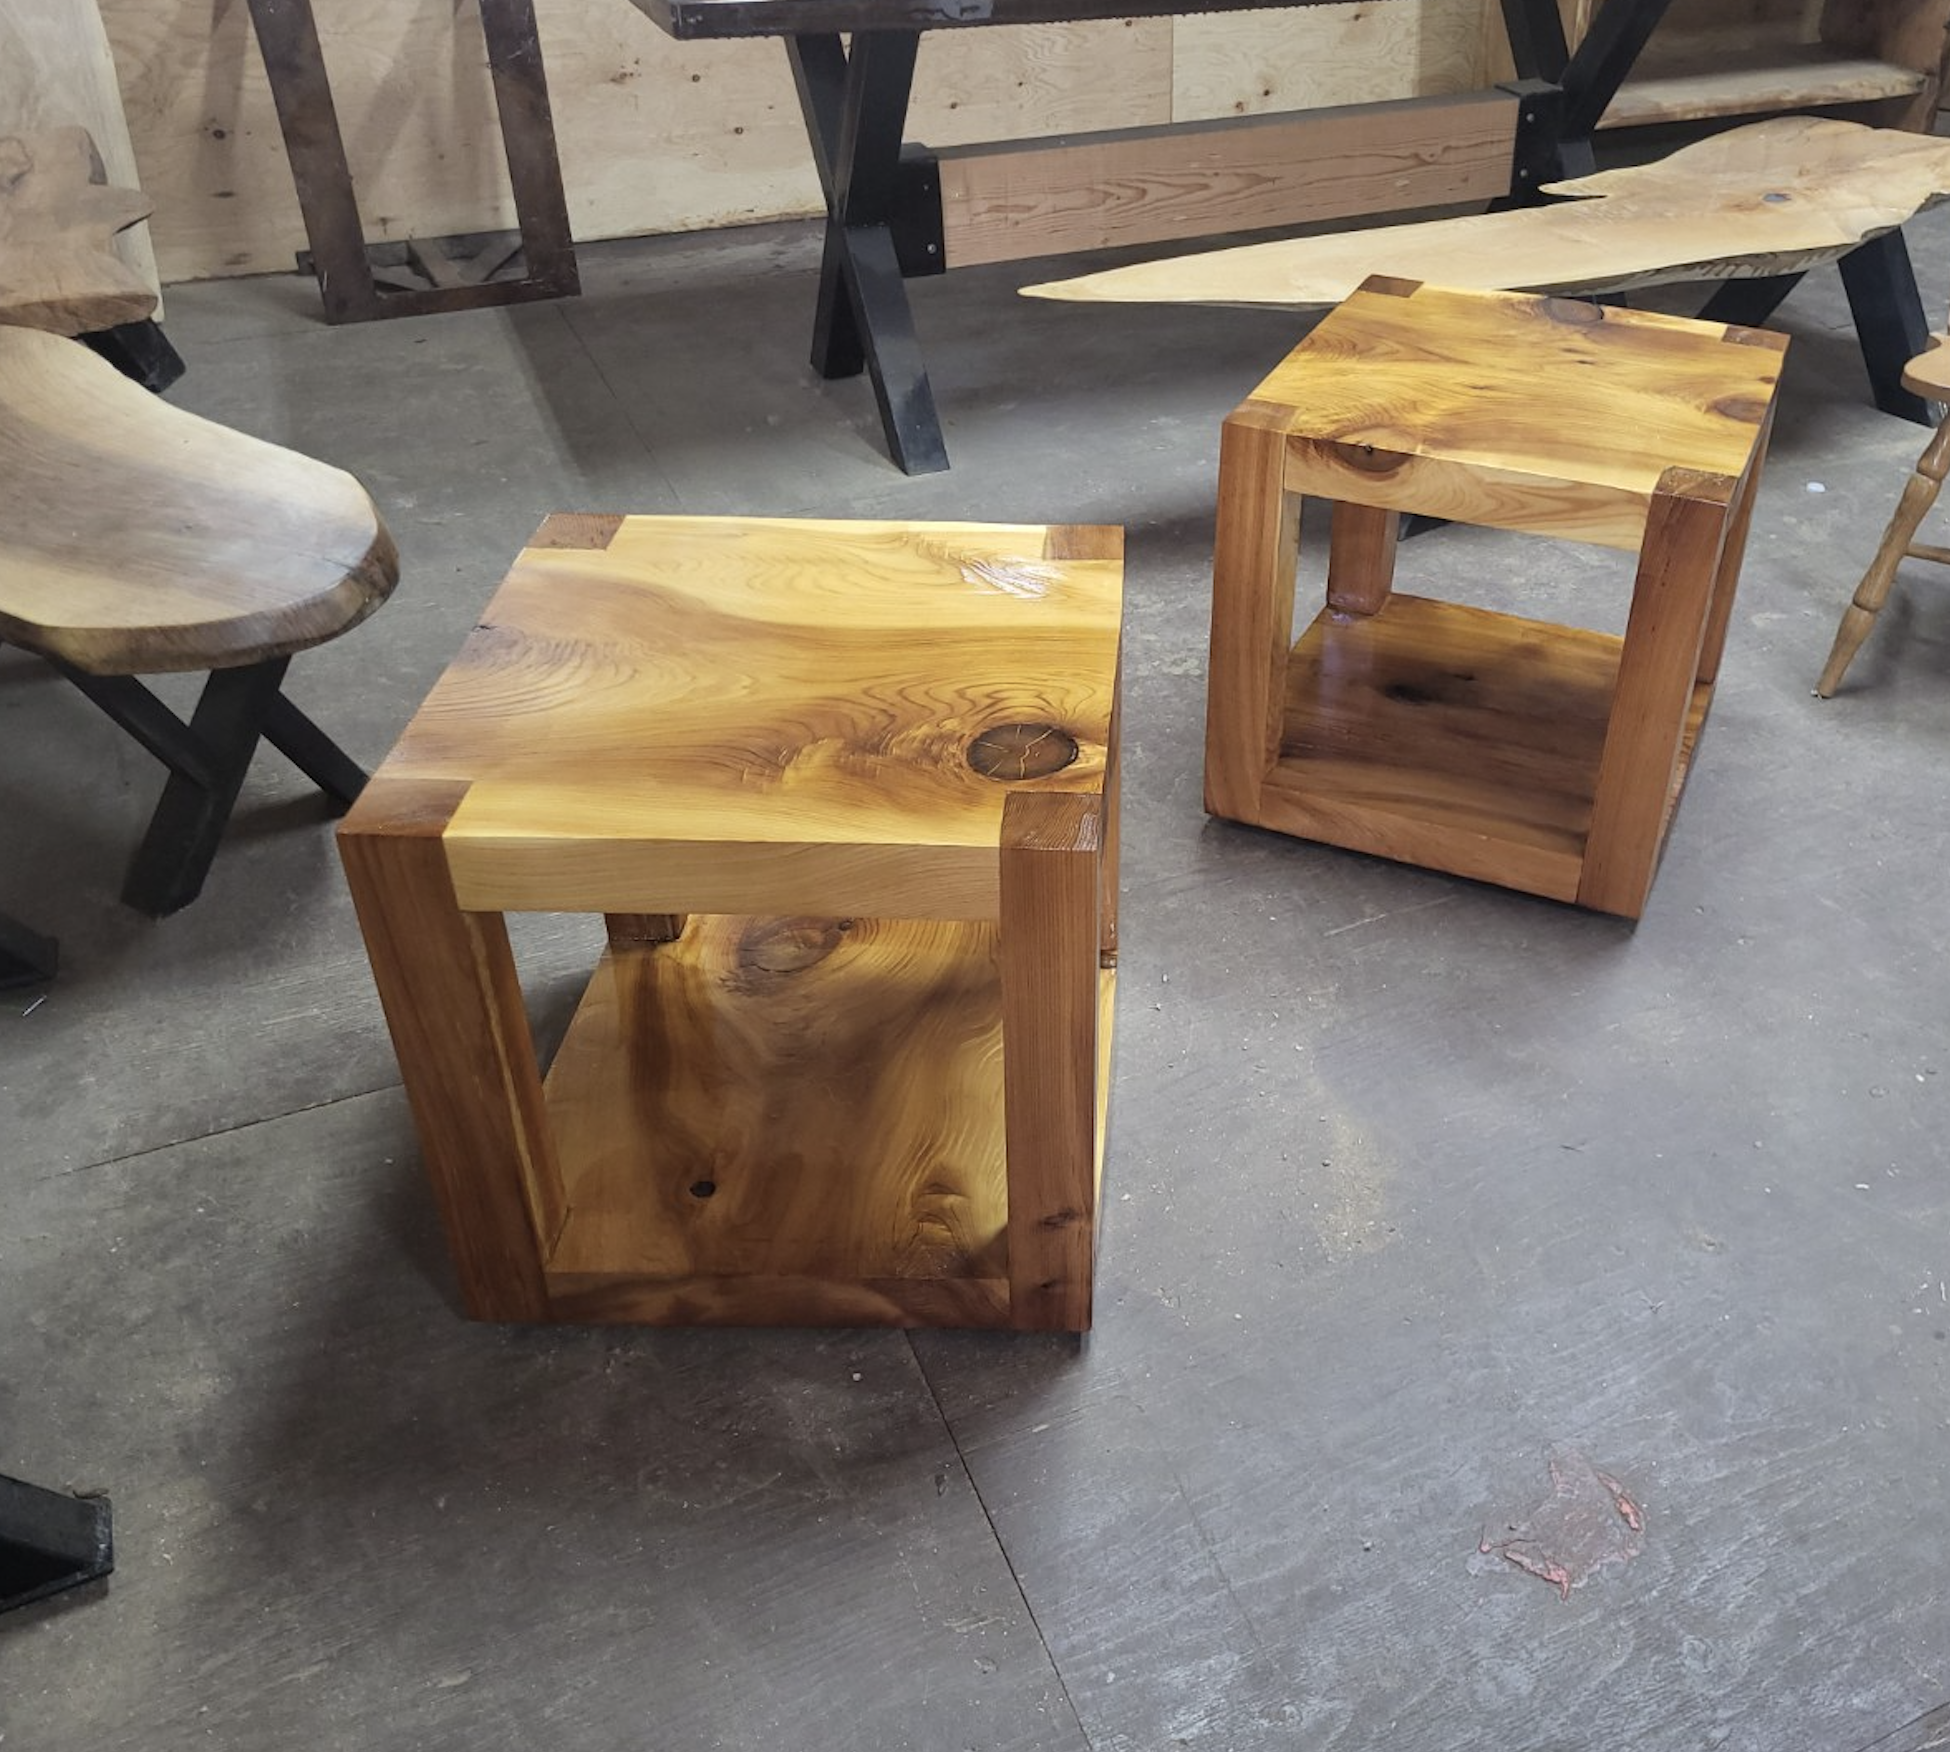 custom hand made wood tables furniture countertops from chilliwack british columbia canada